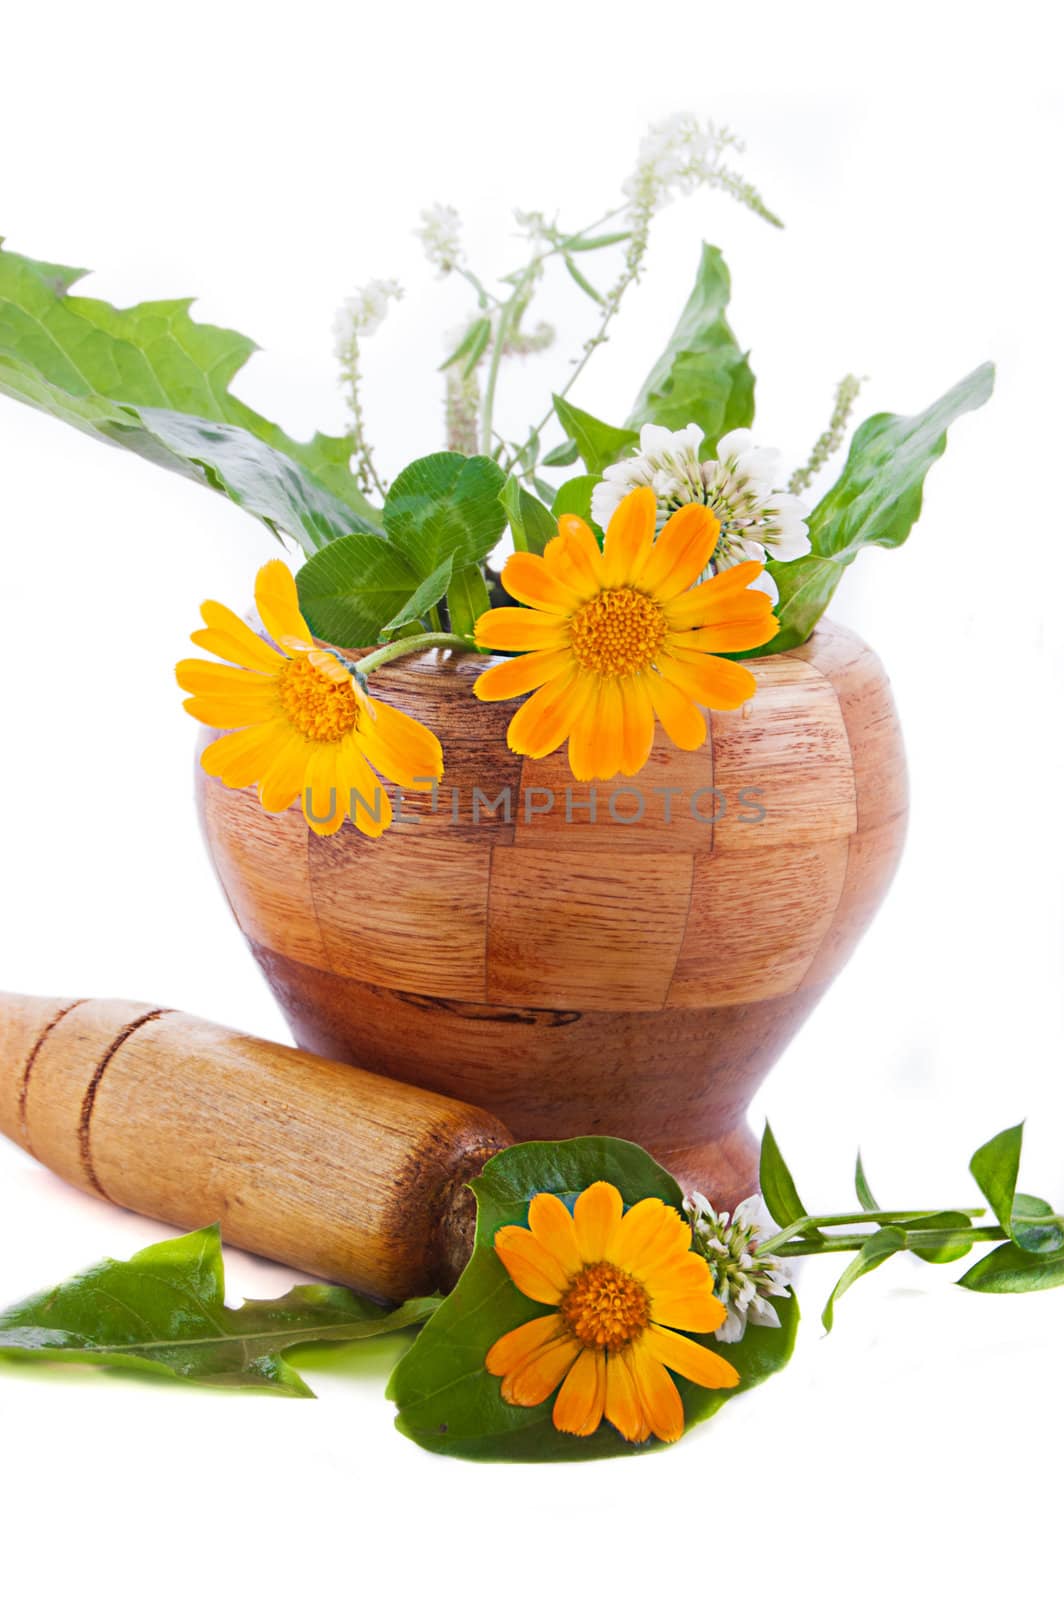 Mortar with herbs and marigolds isolated on white